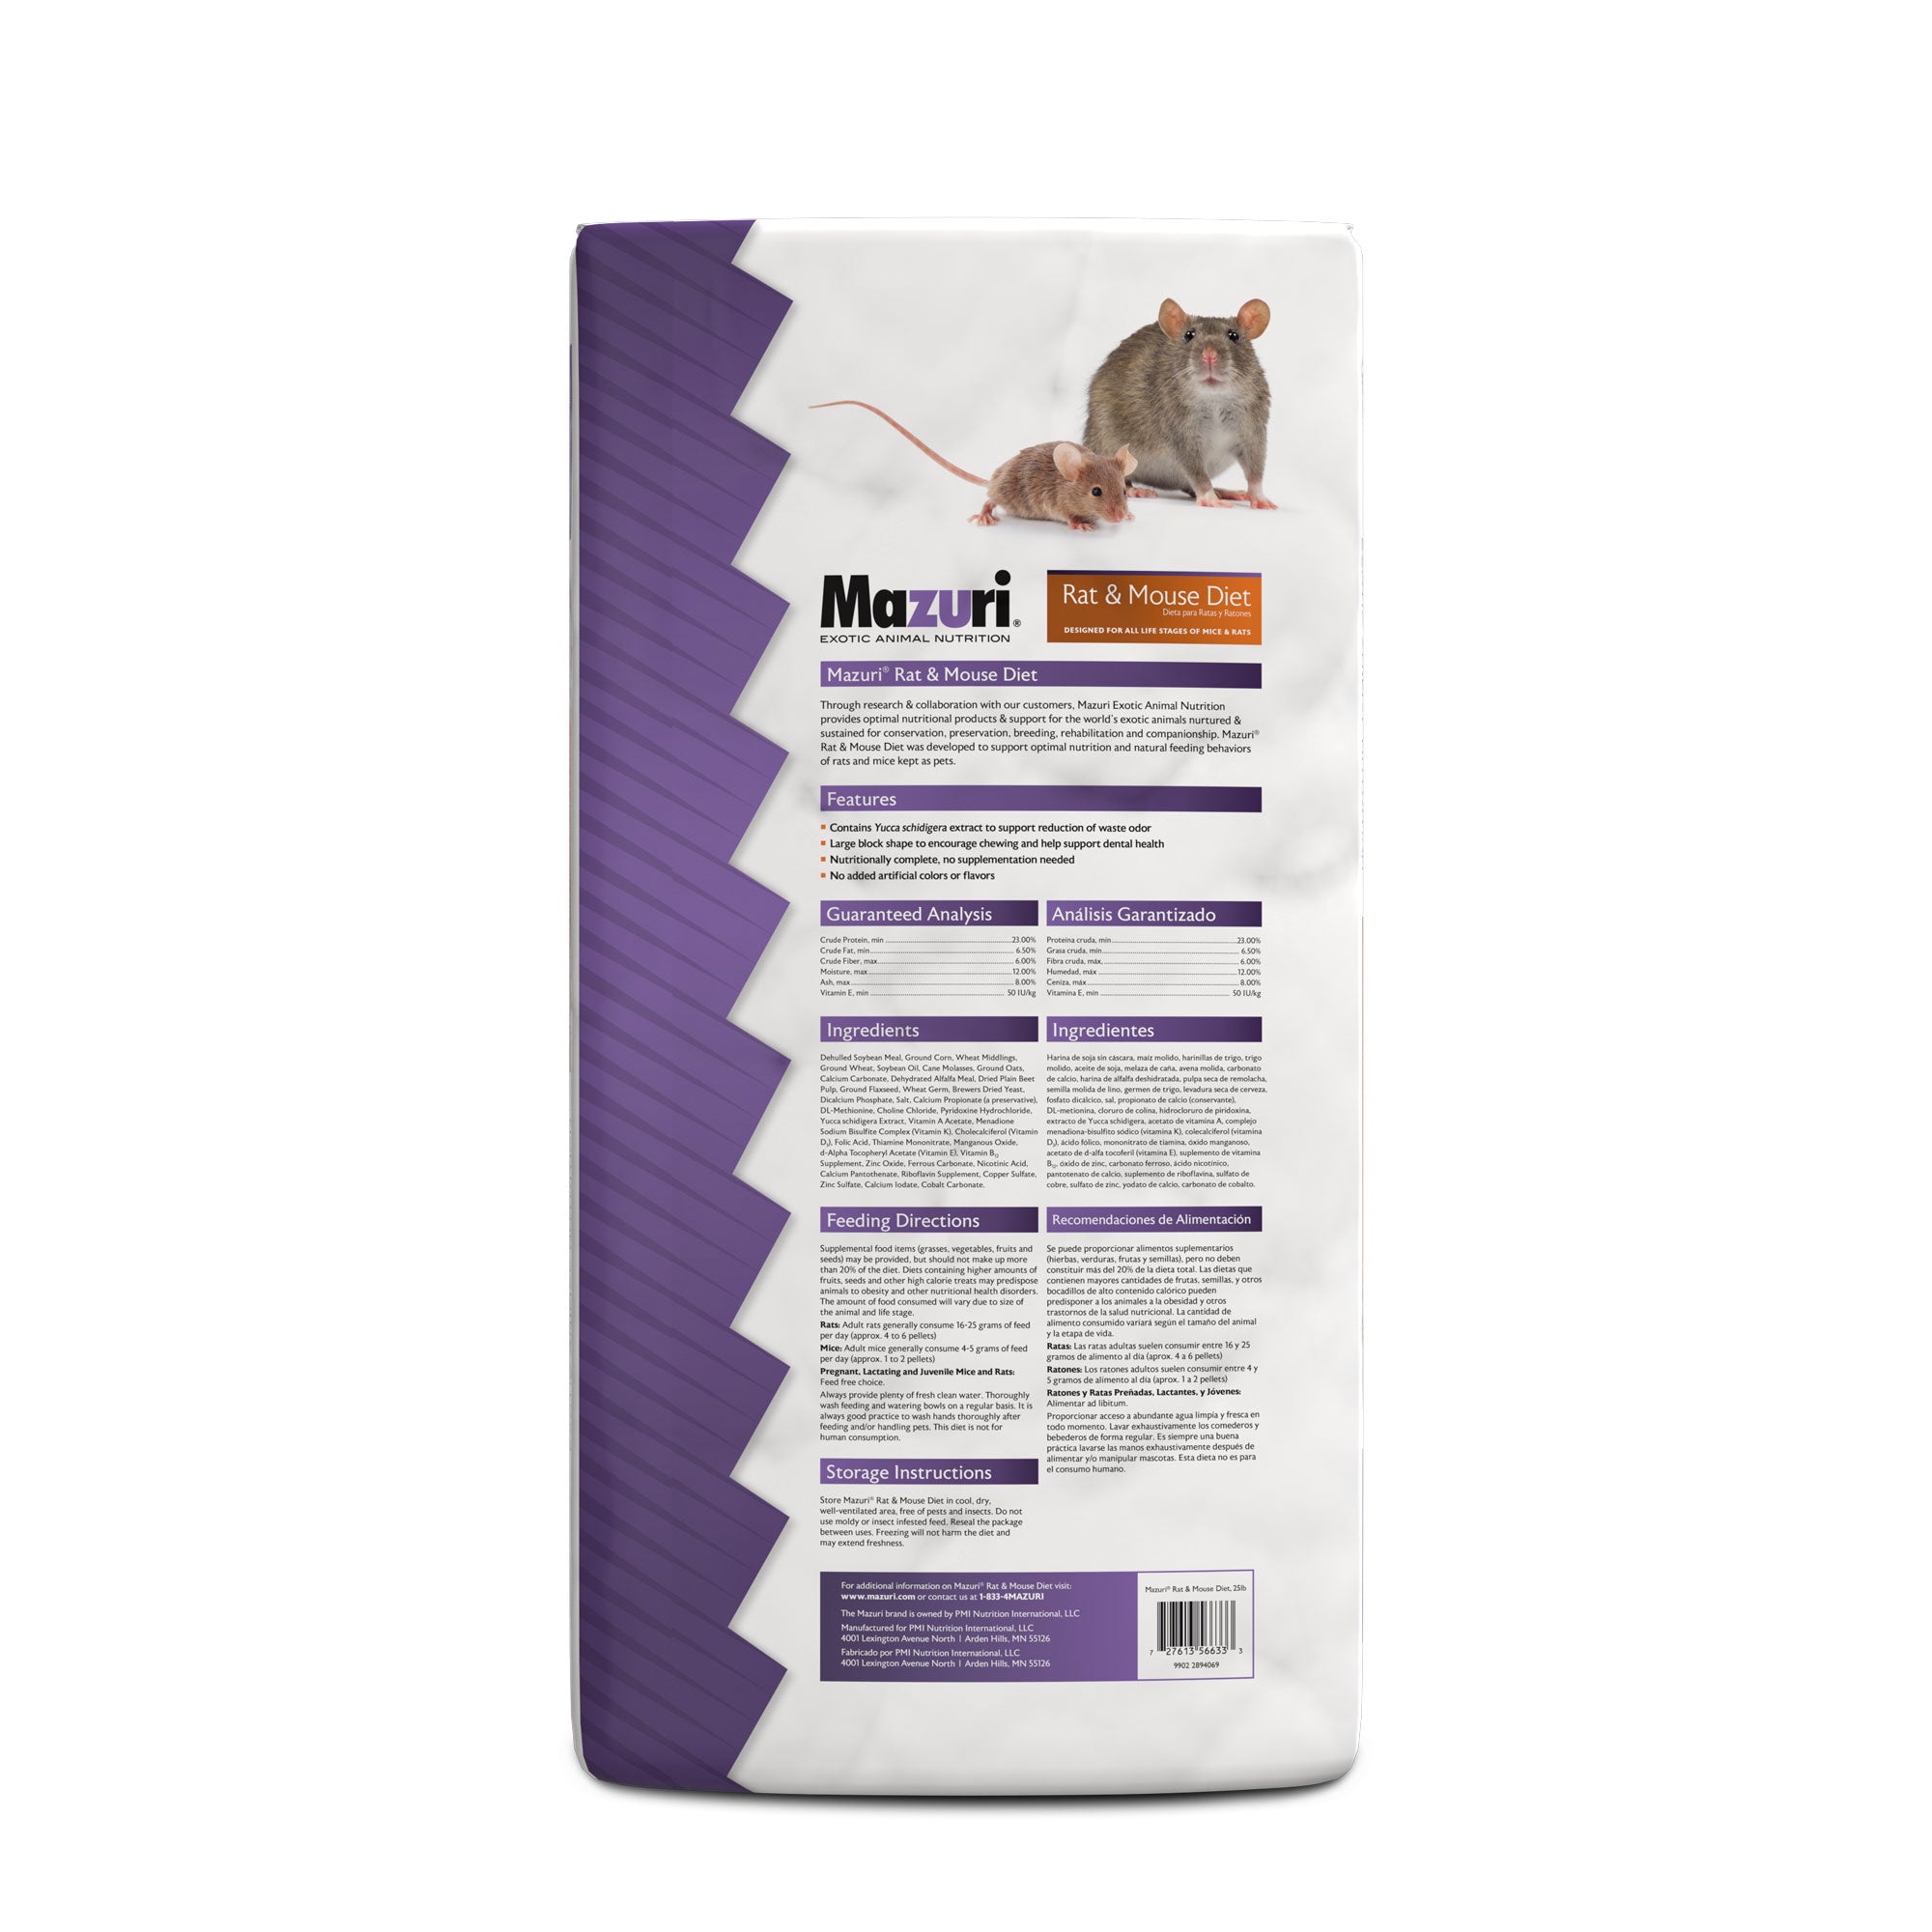 Rat & Mouse Diet 25 pound bag back with product information